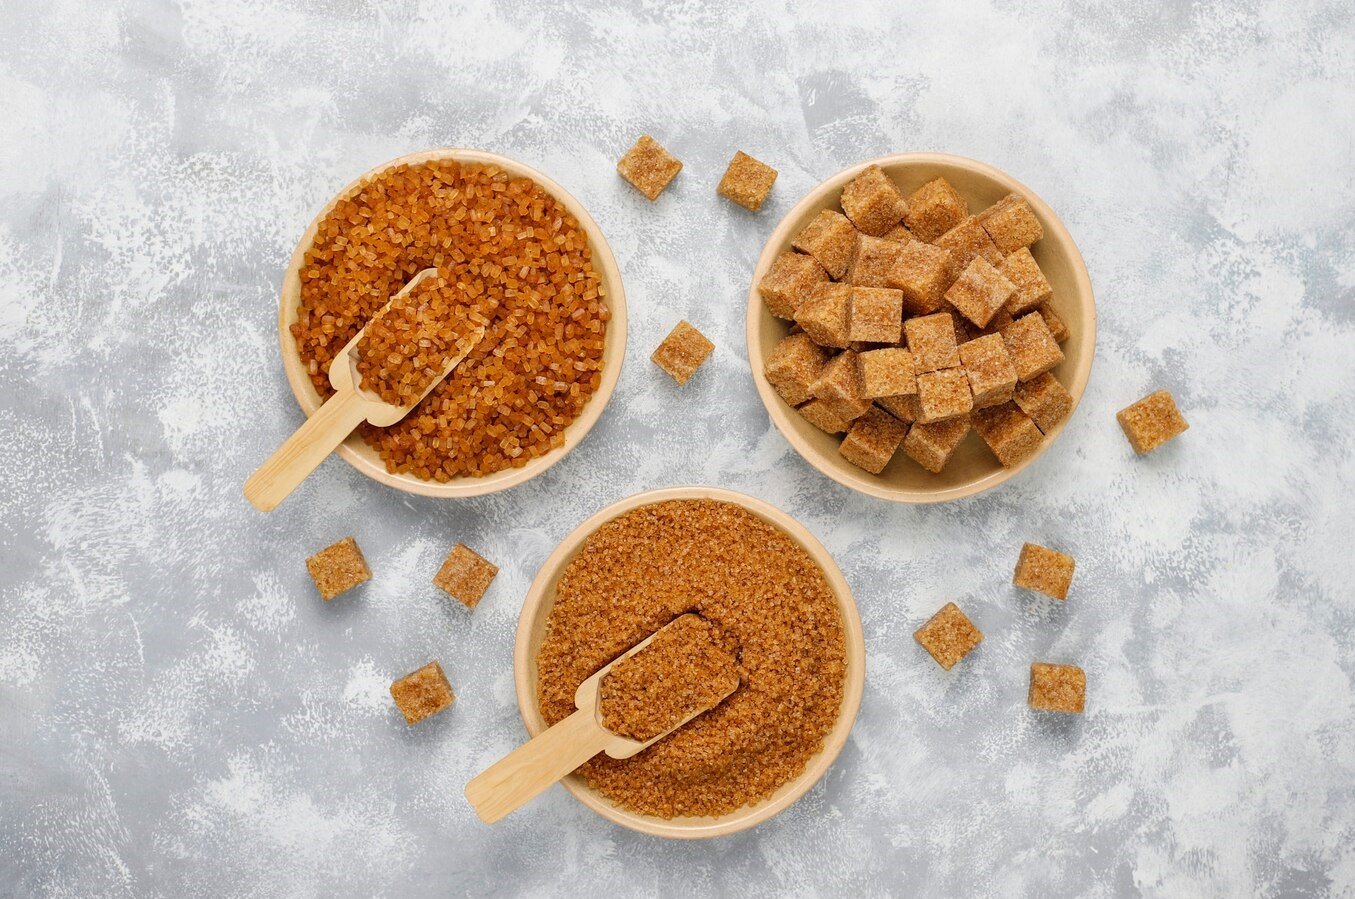 How to Soften Brown Sugar and Prevent Clumping. Image by azerbaijan_stockers on Freepik